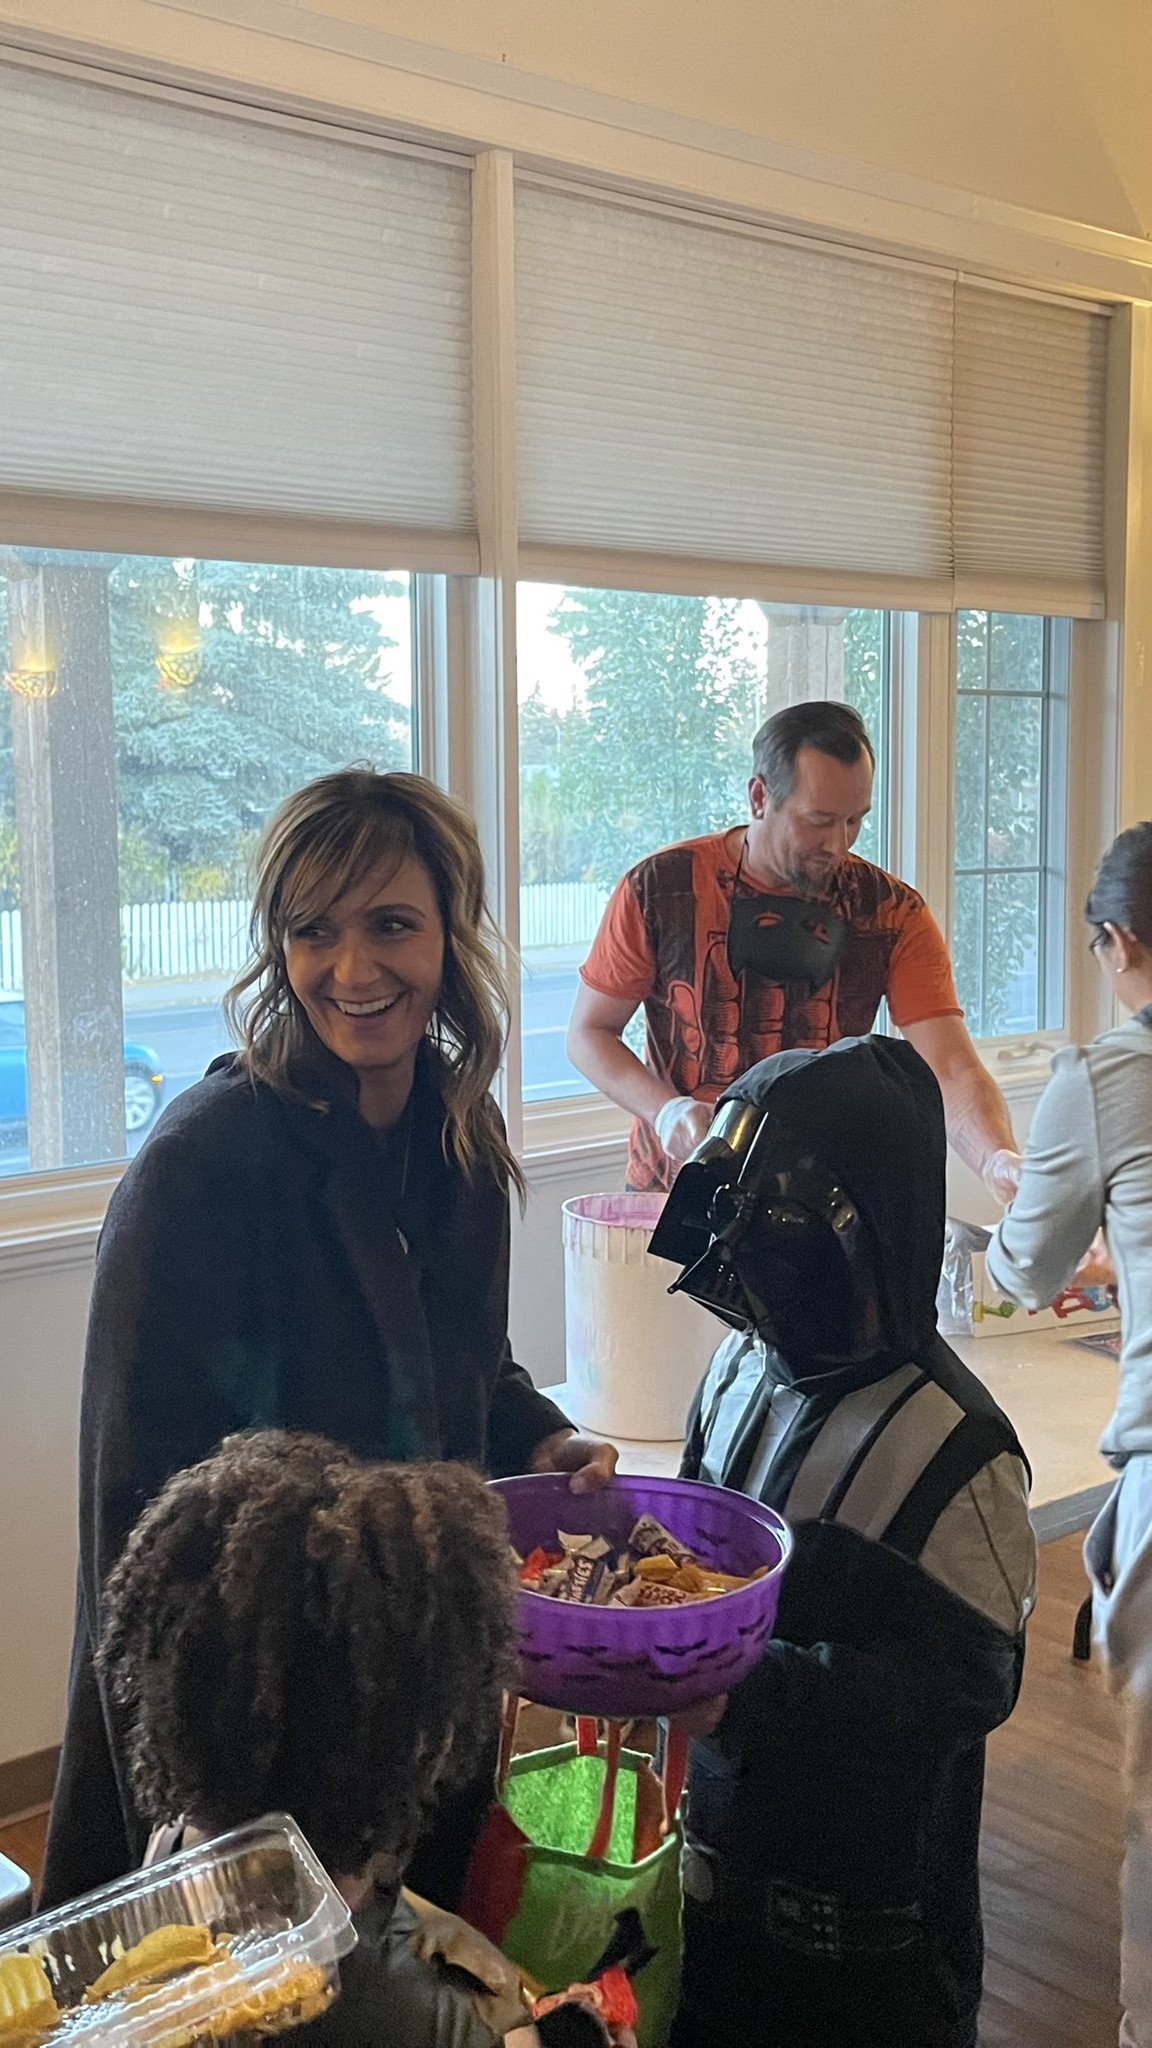 Councillor Sharp and Darth Vader handing out Halloween candy